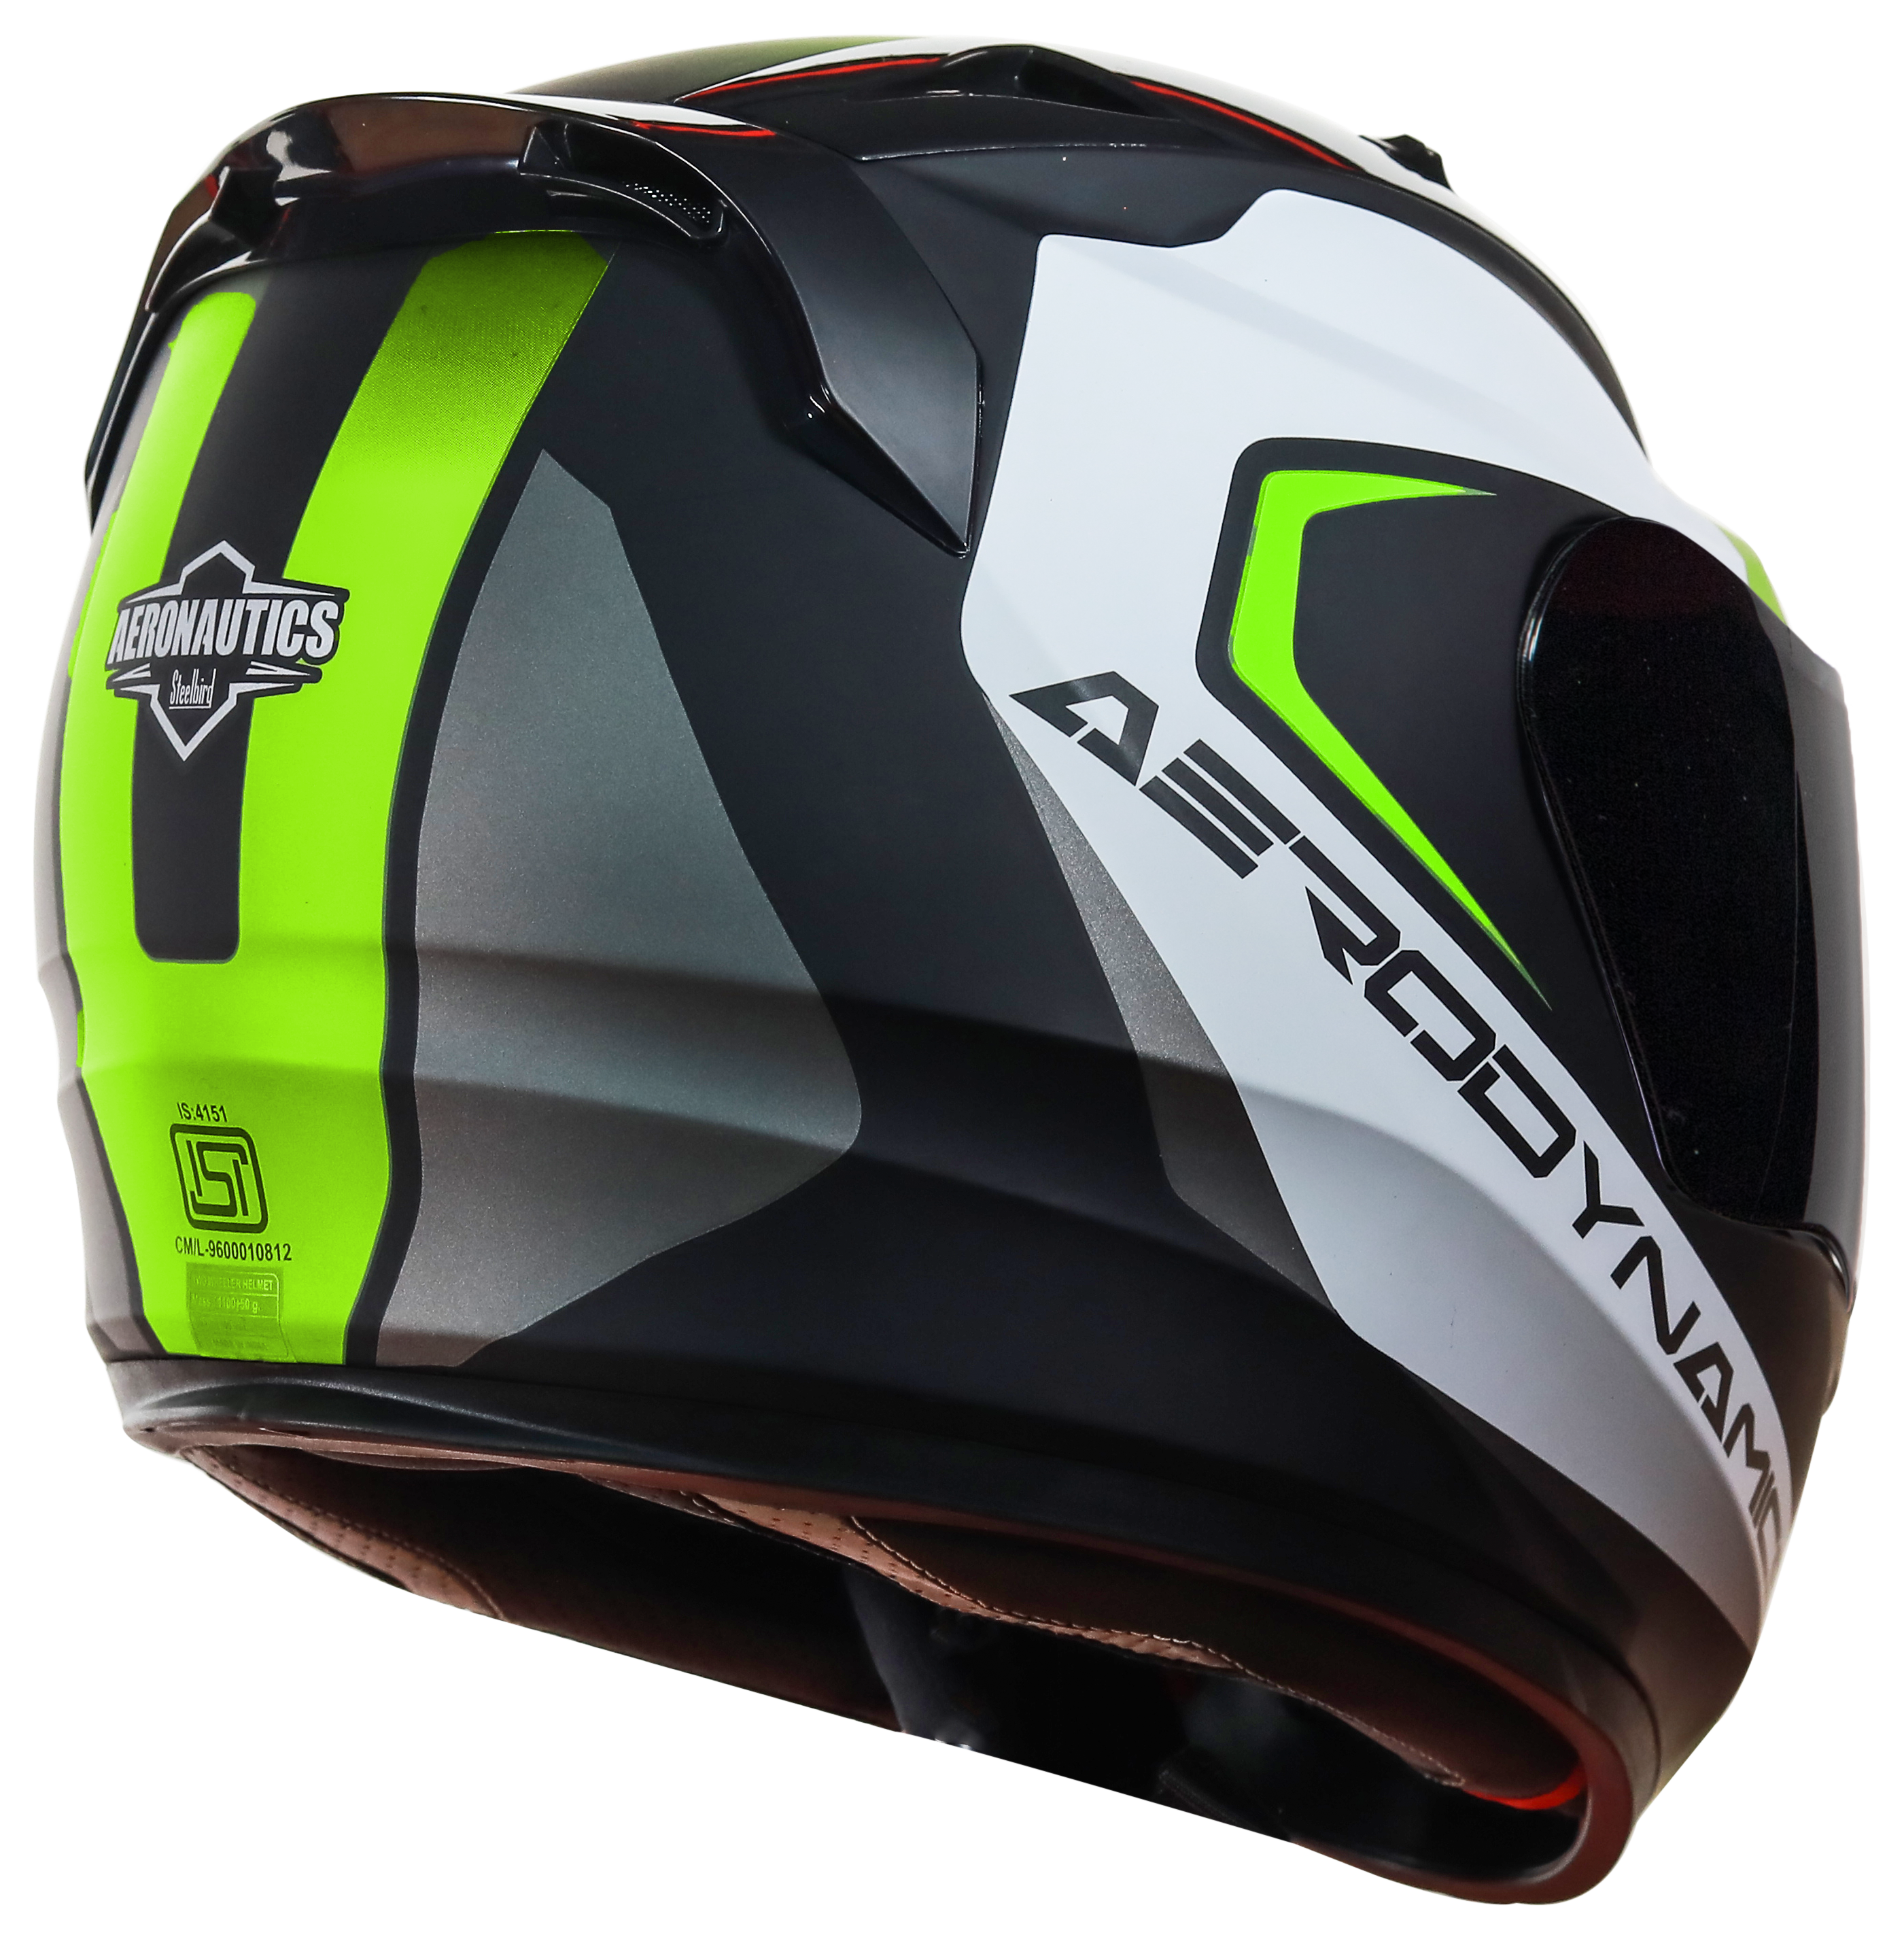 SA-1 Aerodynamics Mat Black With Neon (Fitted With Clear Visor Extra Blue Chrome Visor Free)